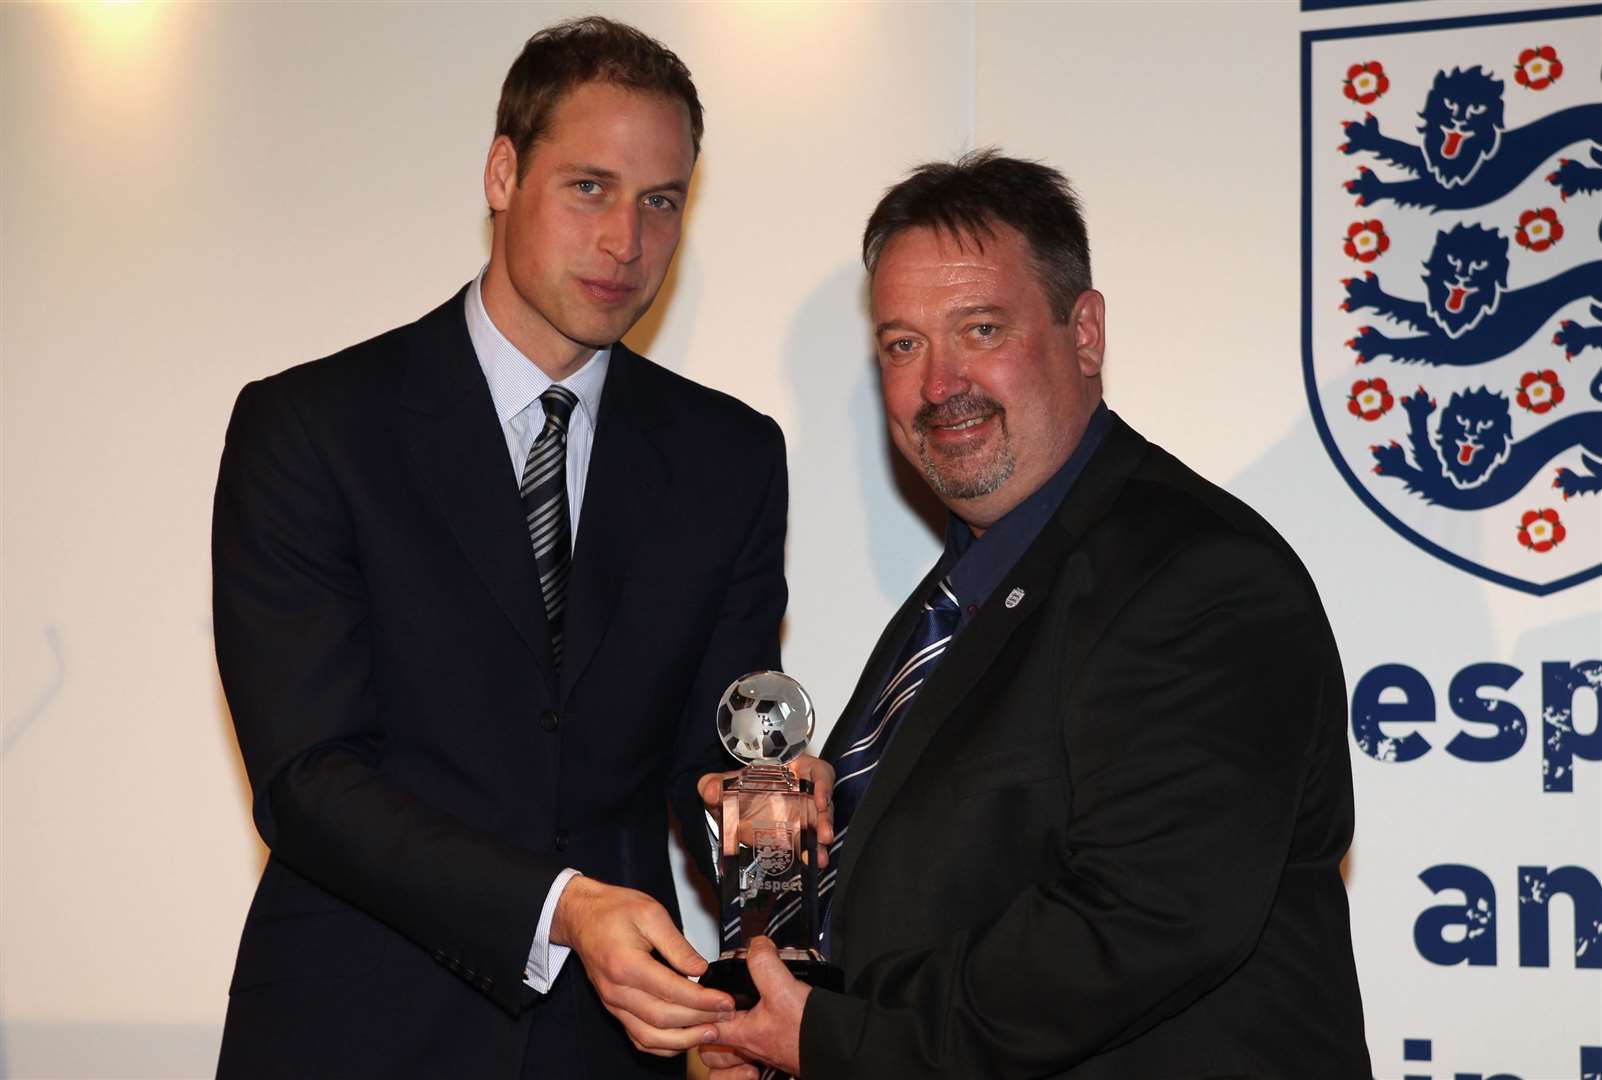 Prince William presents the Respect and Fair Play Awards at Wembley Stadium on May 15, 2010 to Sheppey's Mark Rogers. Picture: Julian Finney/The FA/Getty Images